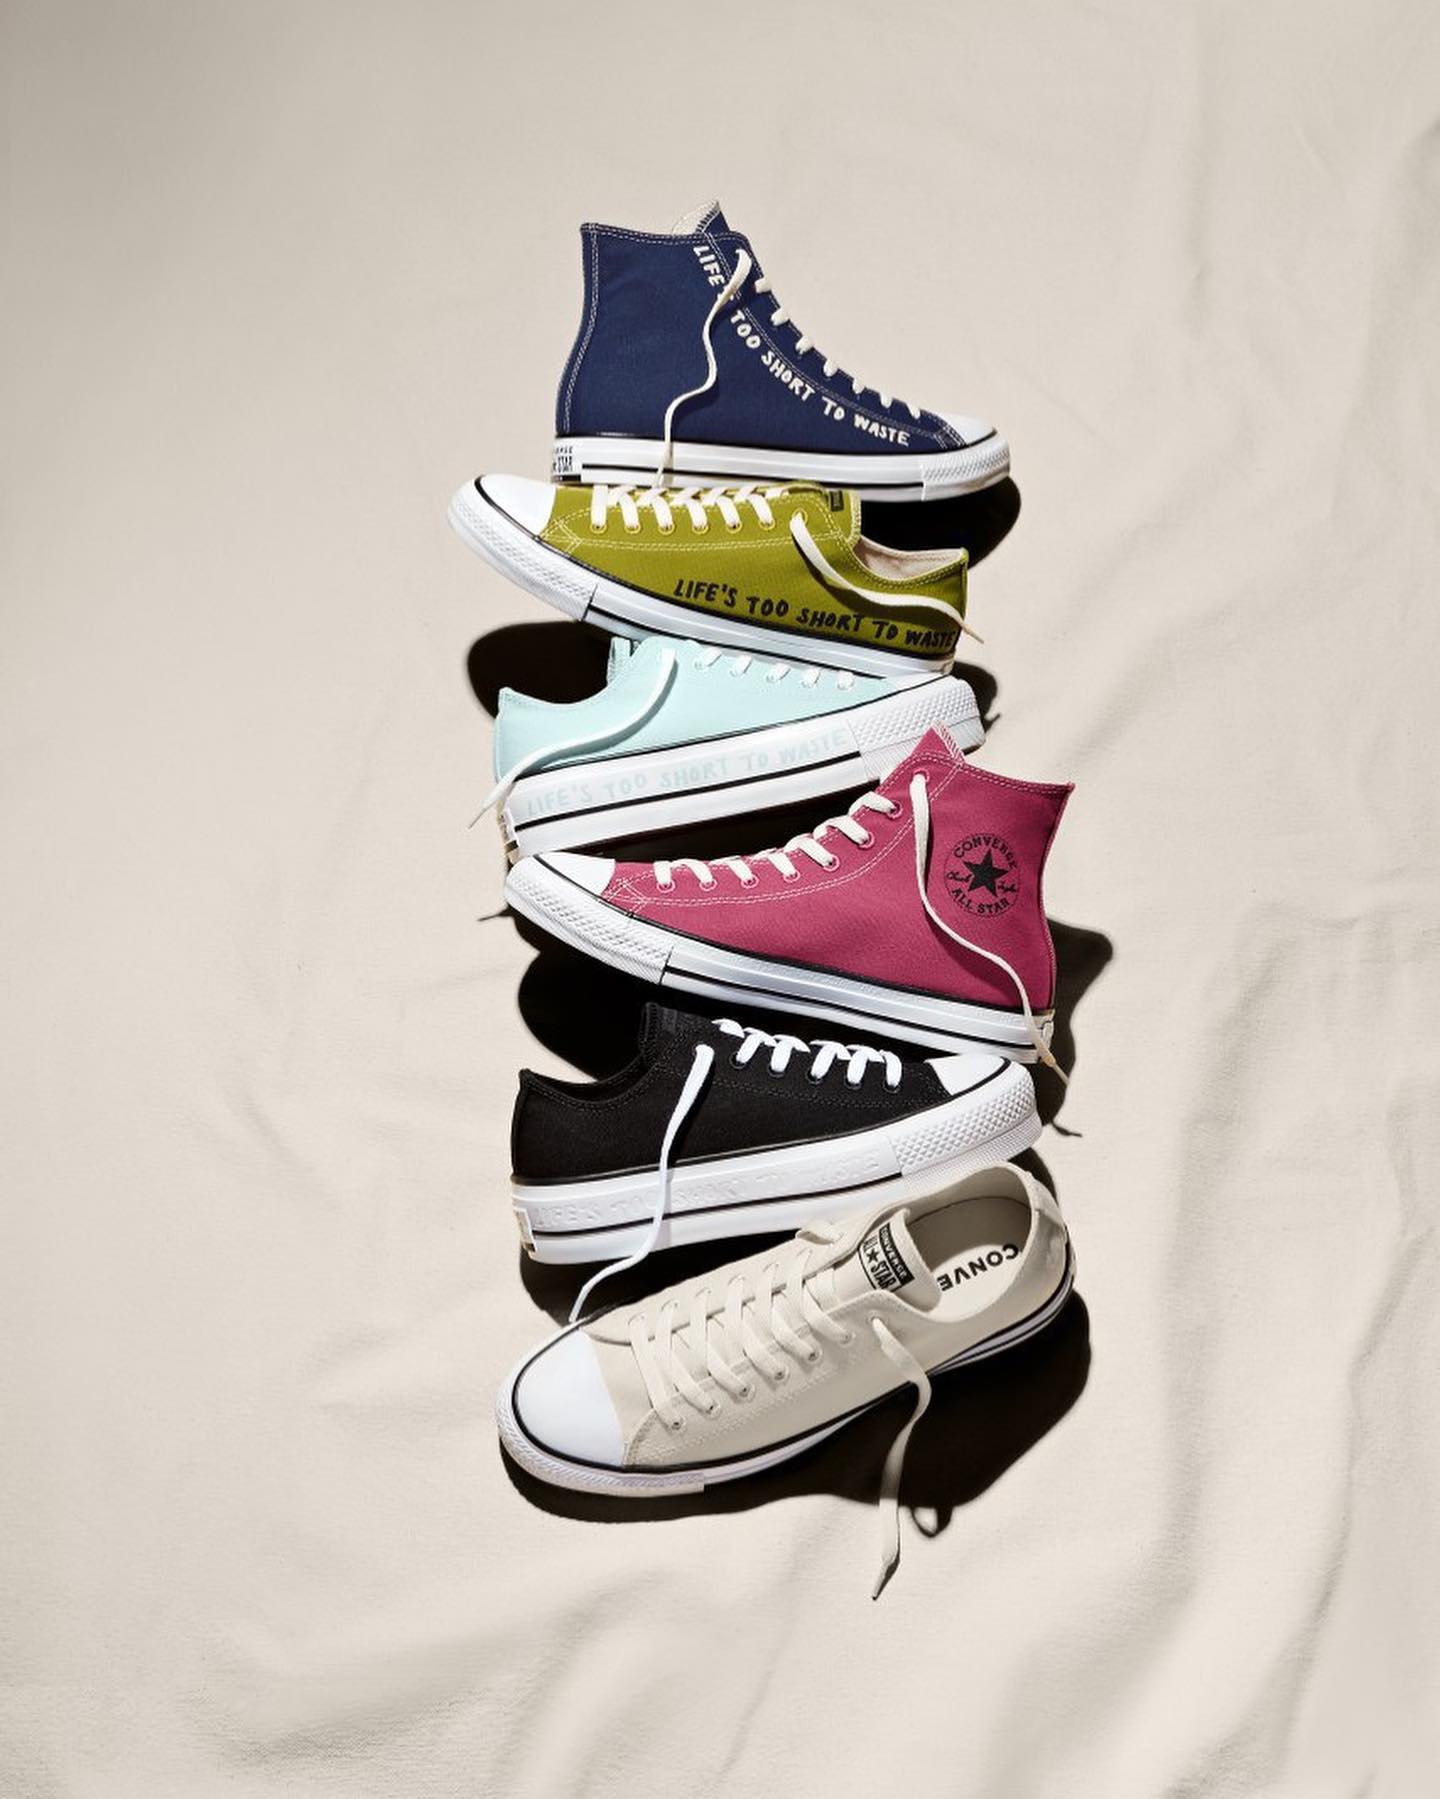 converse life's too short to waste